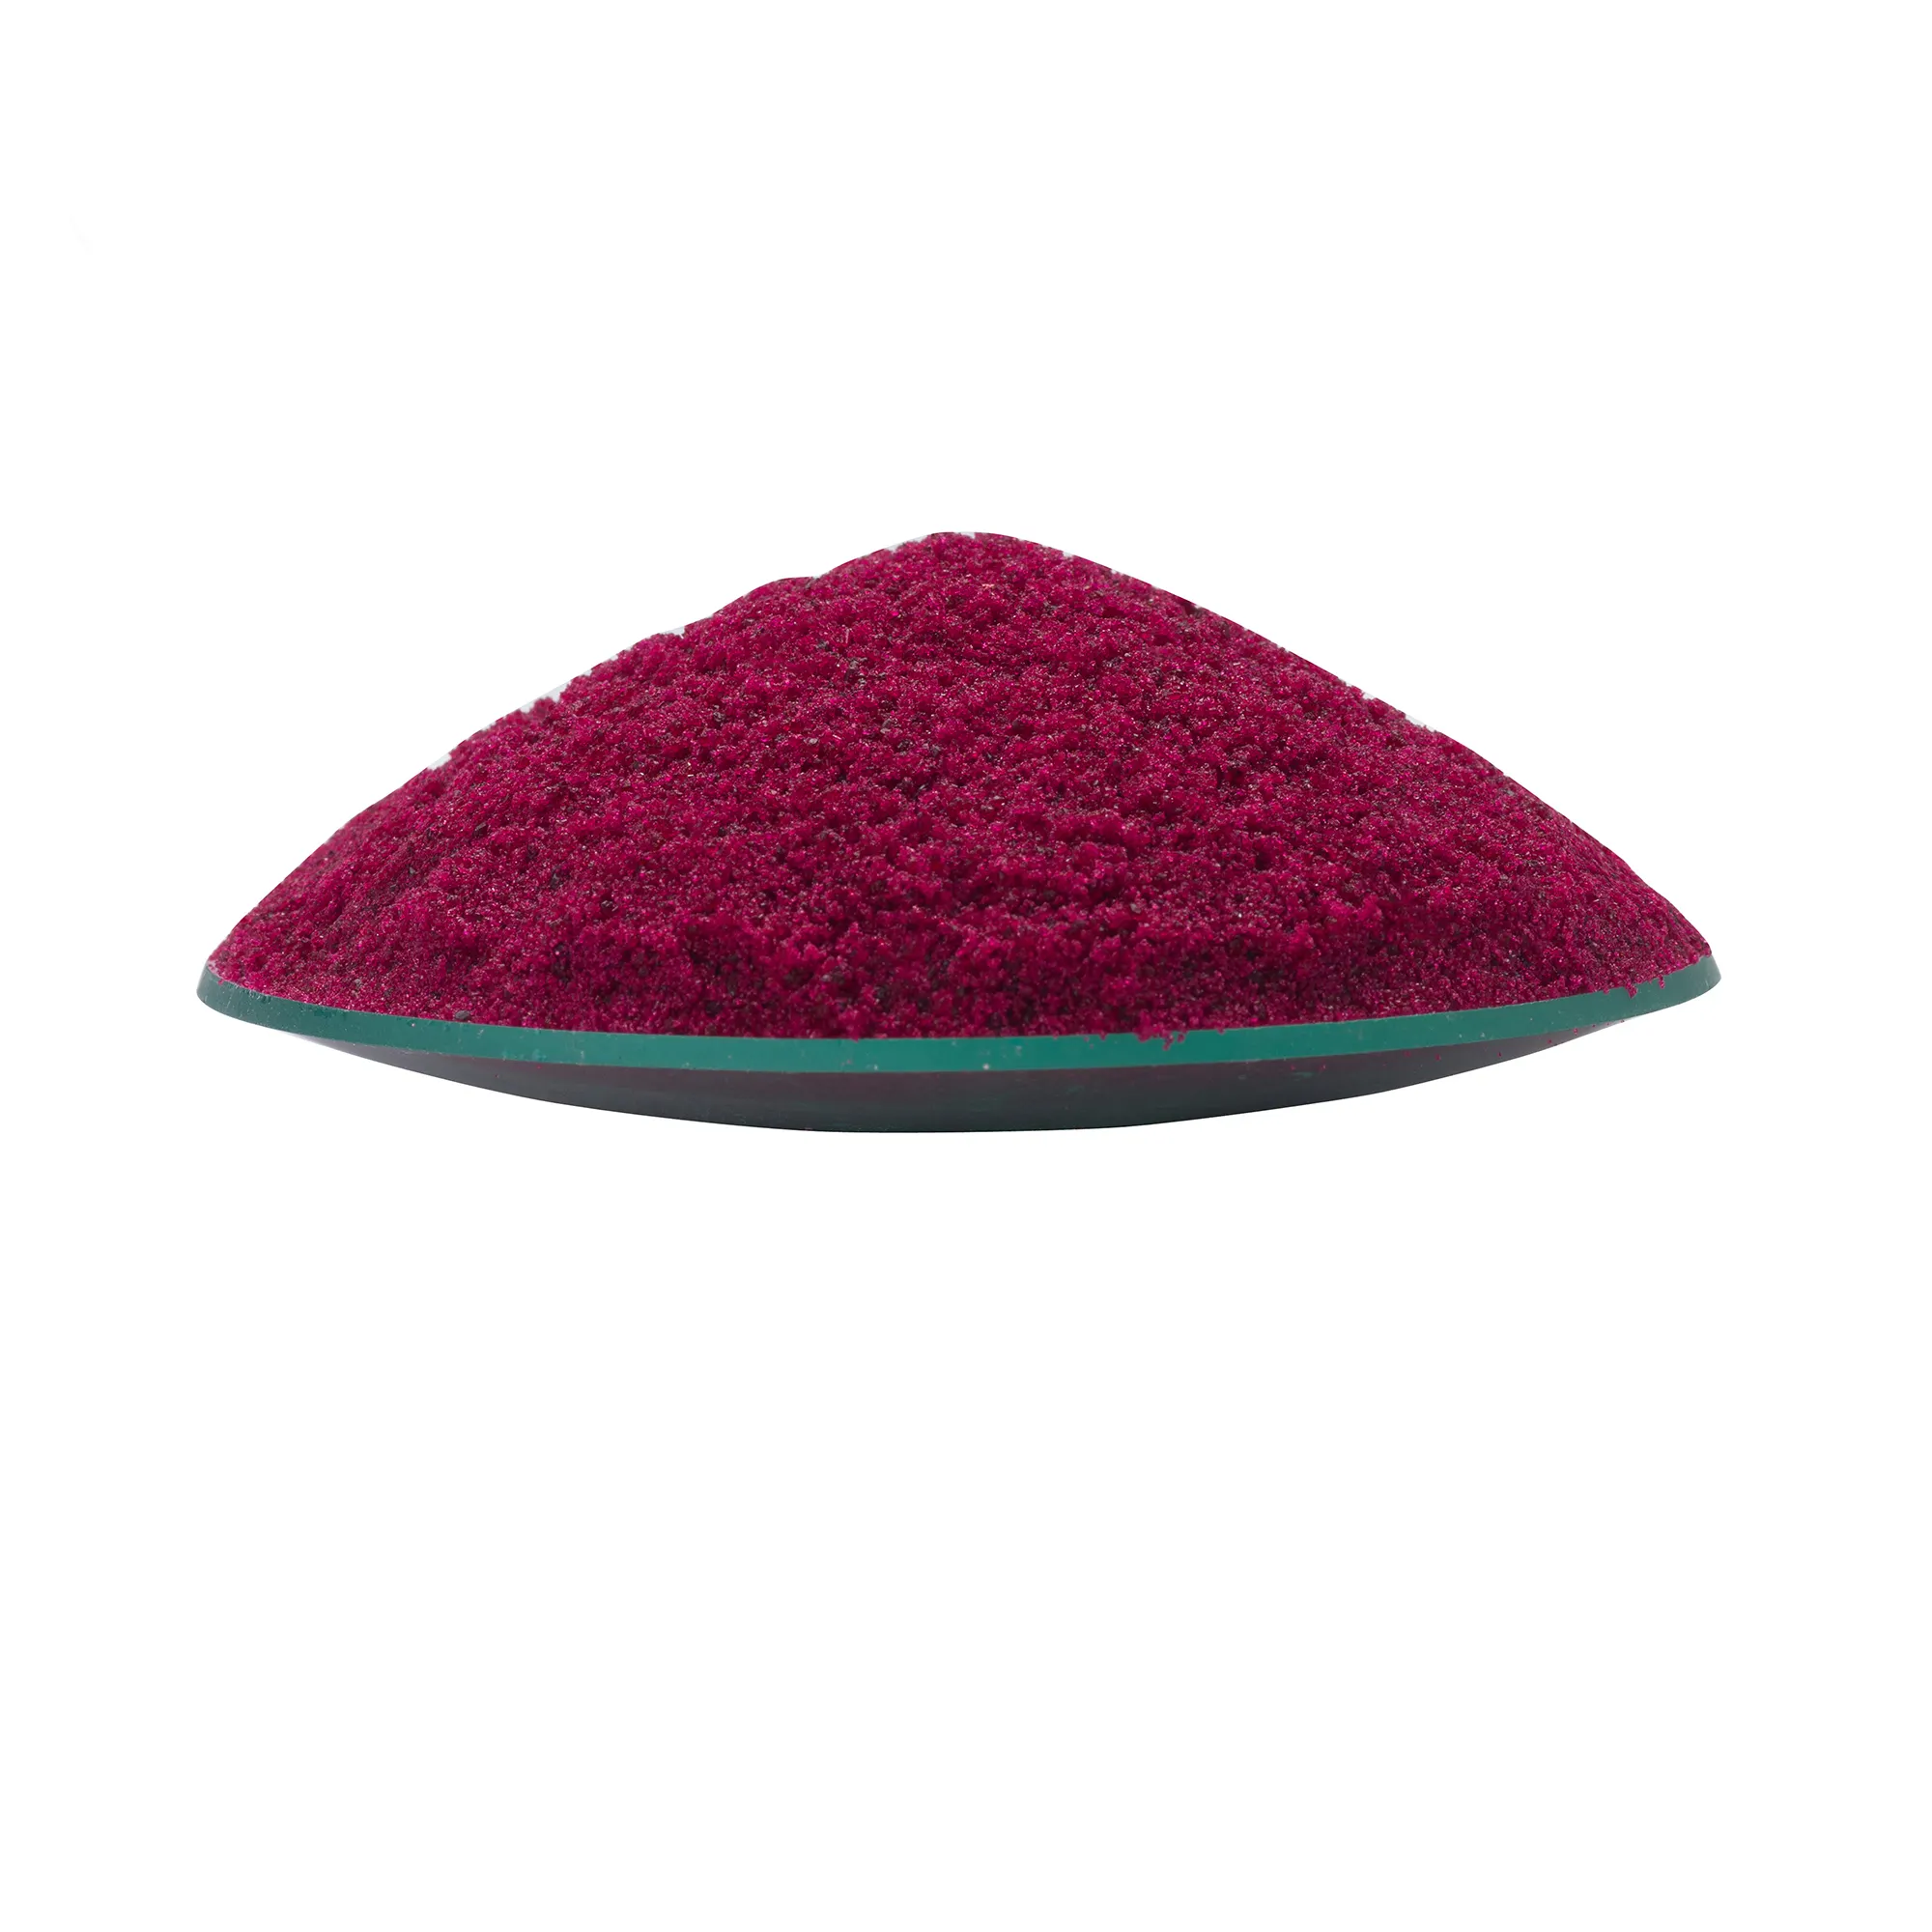 Hot sale cobalt chloride with fast delivery